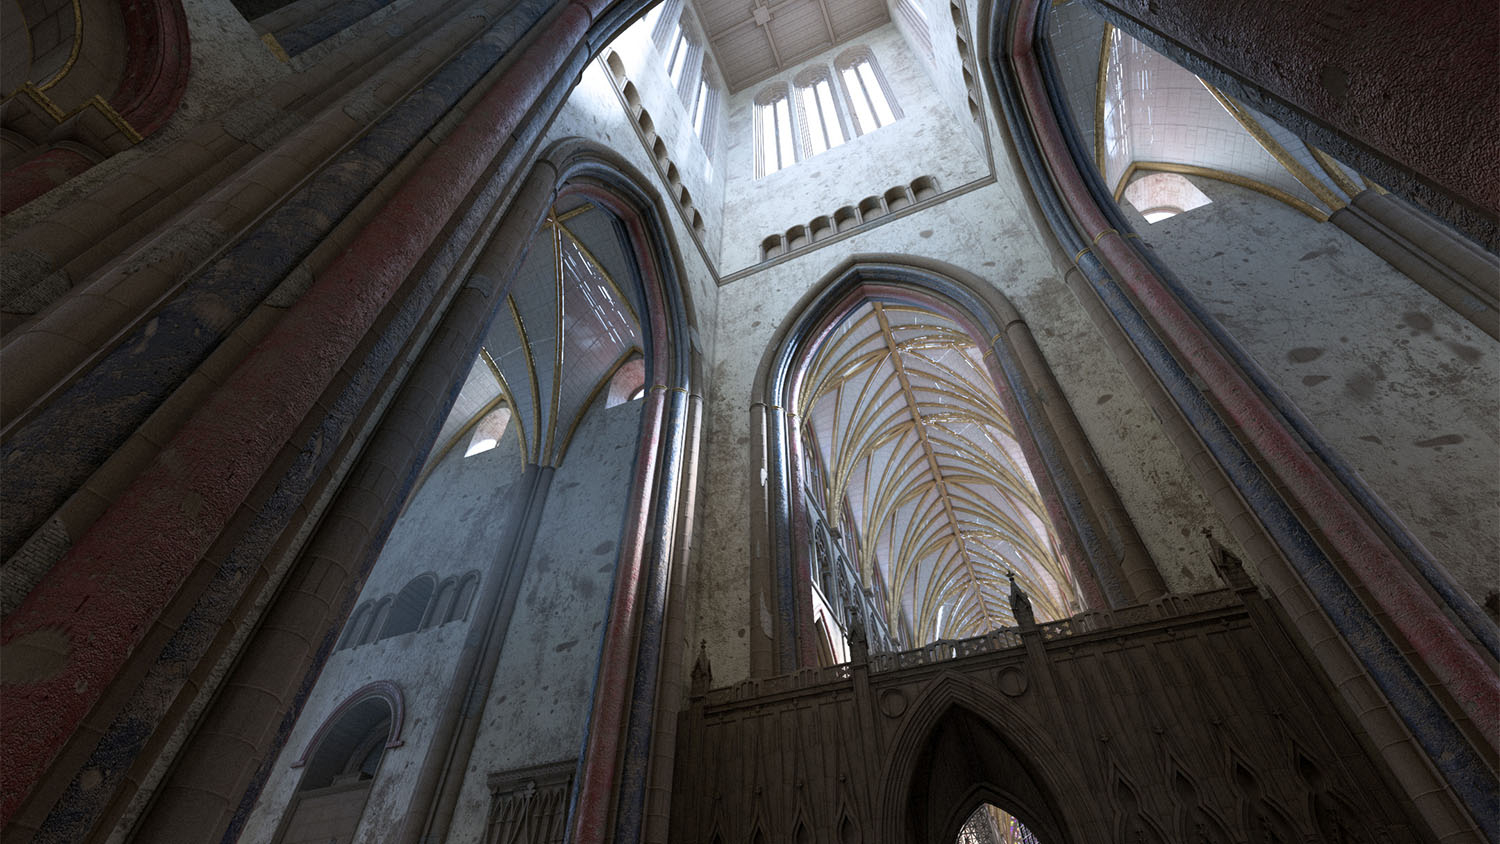 computer-generated image of what the inside of St. Paul's Cathedral would have looked like in 1622, looking up from the floor toward the vaulted ceiling in the cathedral's tower